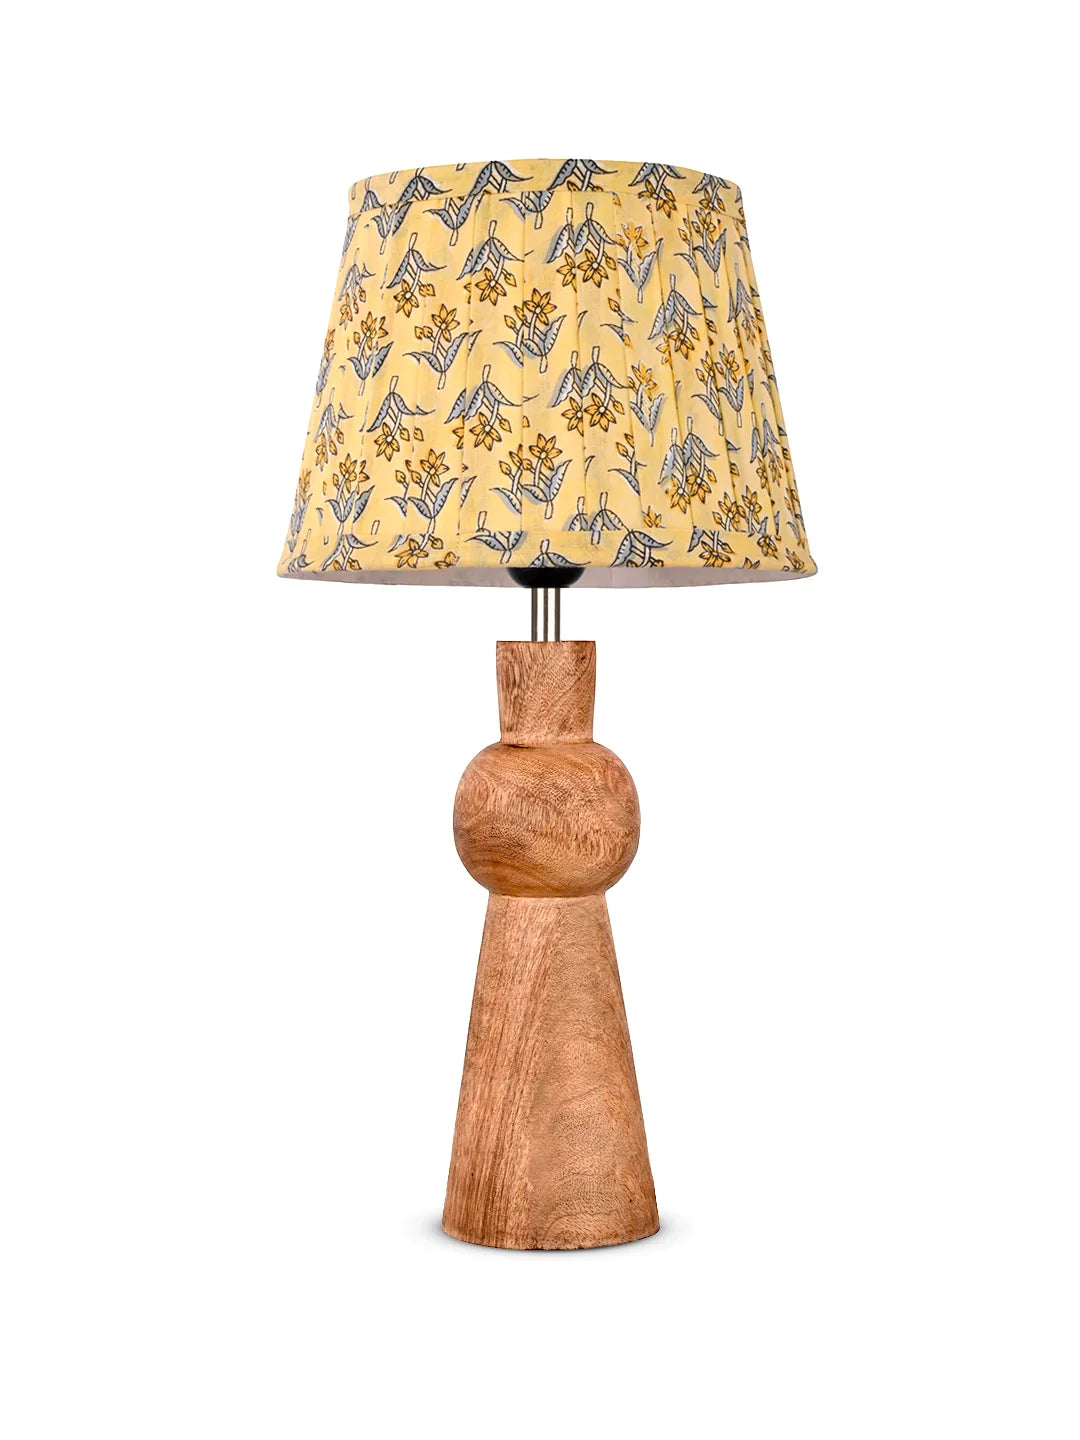 Wooden Skirt Table Lamp with Pleeted Colorful Lemon Taper Shade